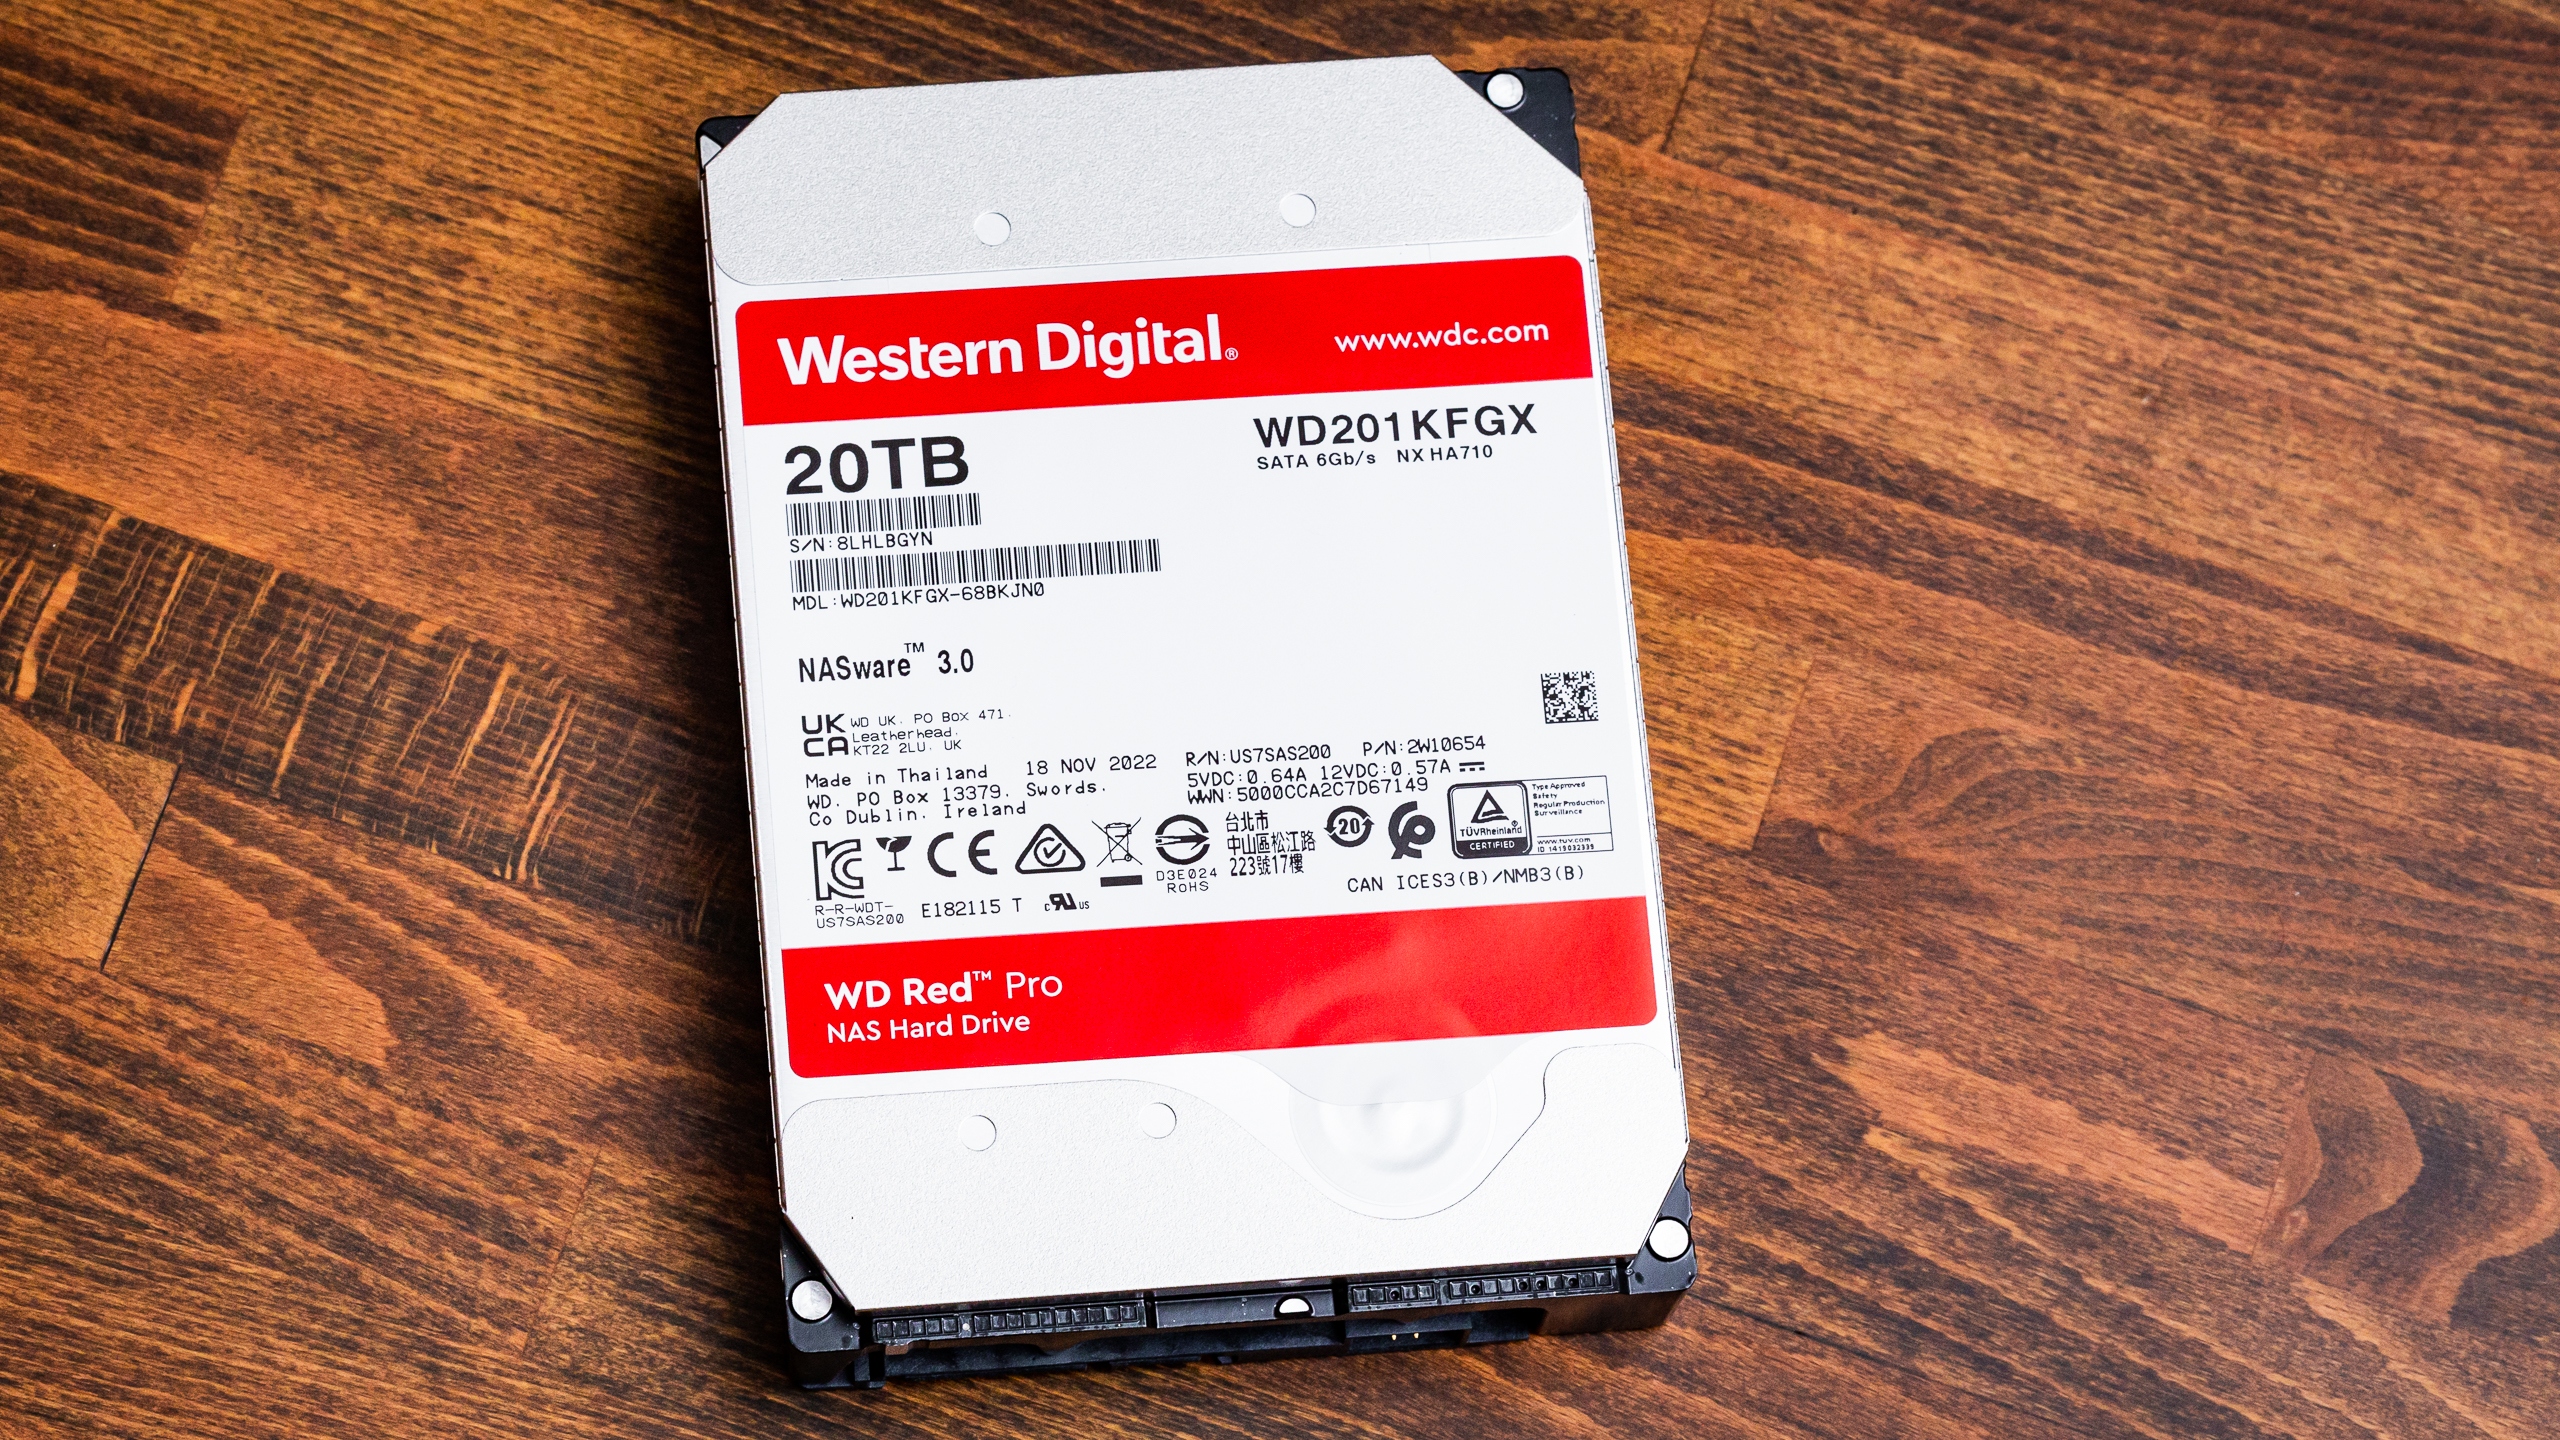 Seagate IronWolf 12TB HDD Review - Tom's Hardware